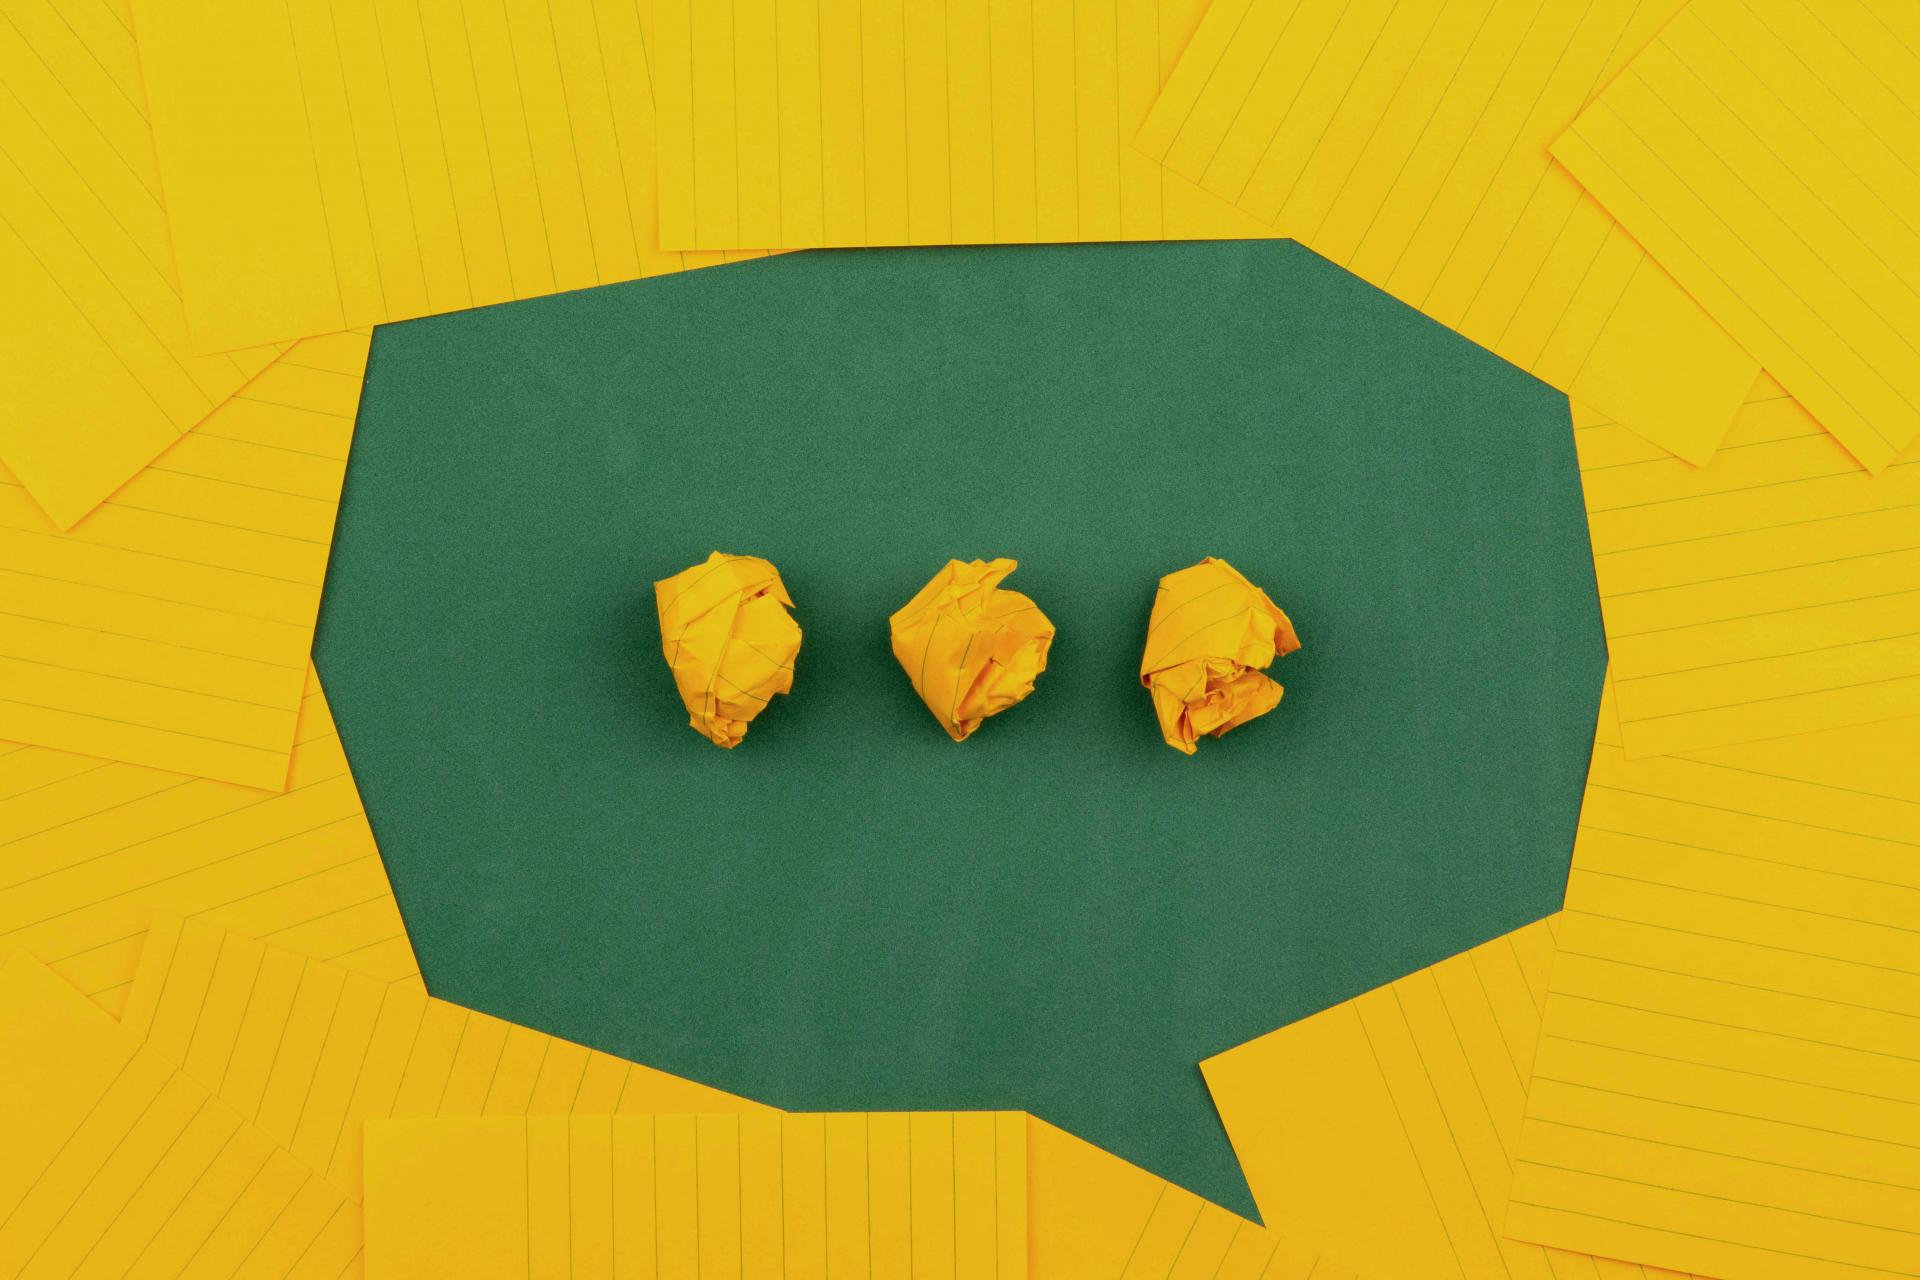 Speech bubble made out of yellow post-its